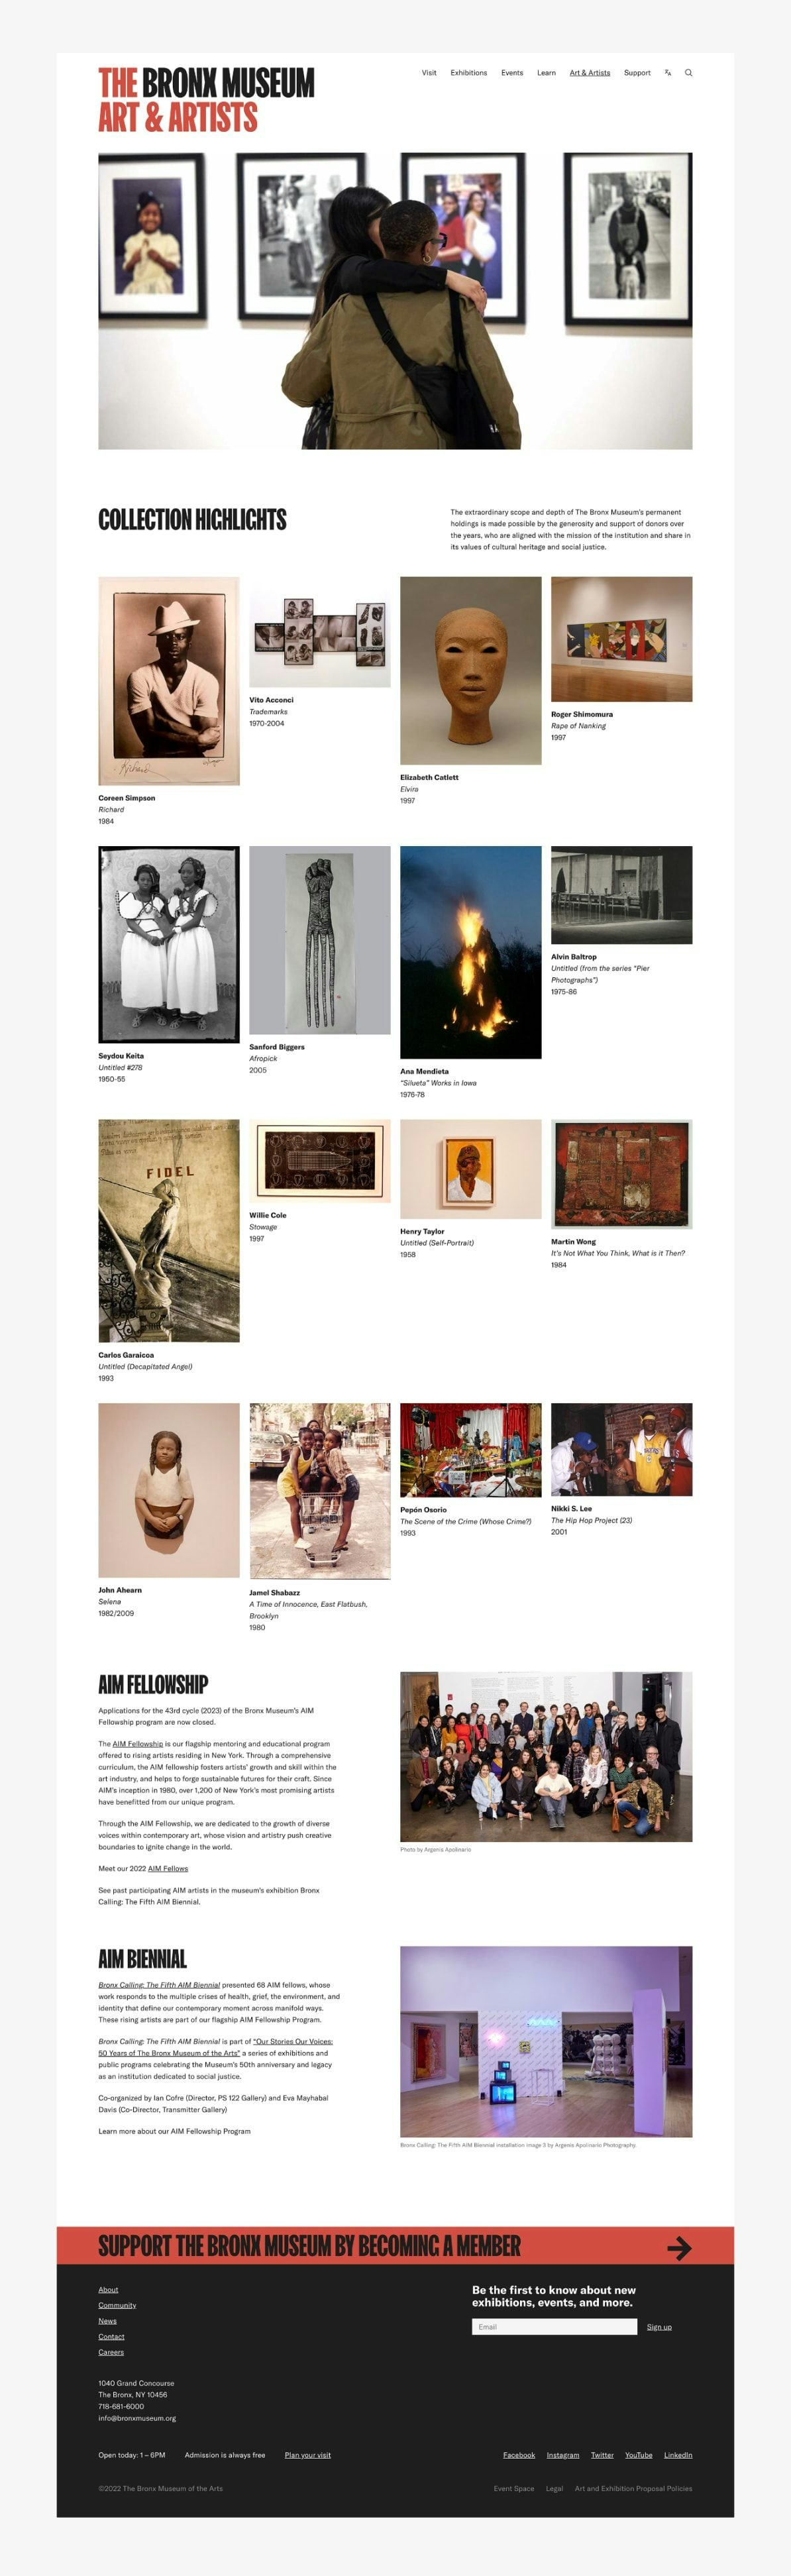 Mockup of the Art & Artists page on the Bronx Museum website